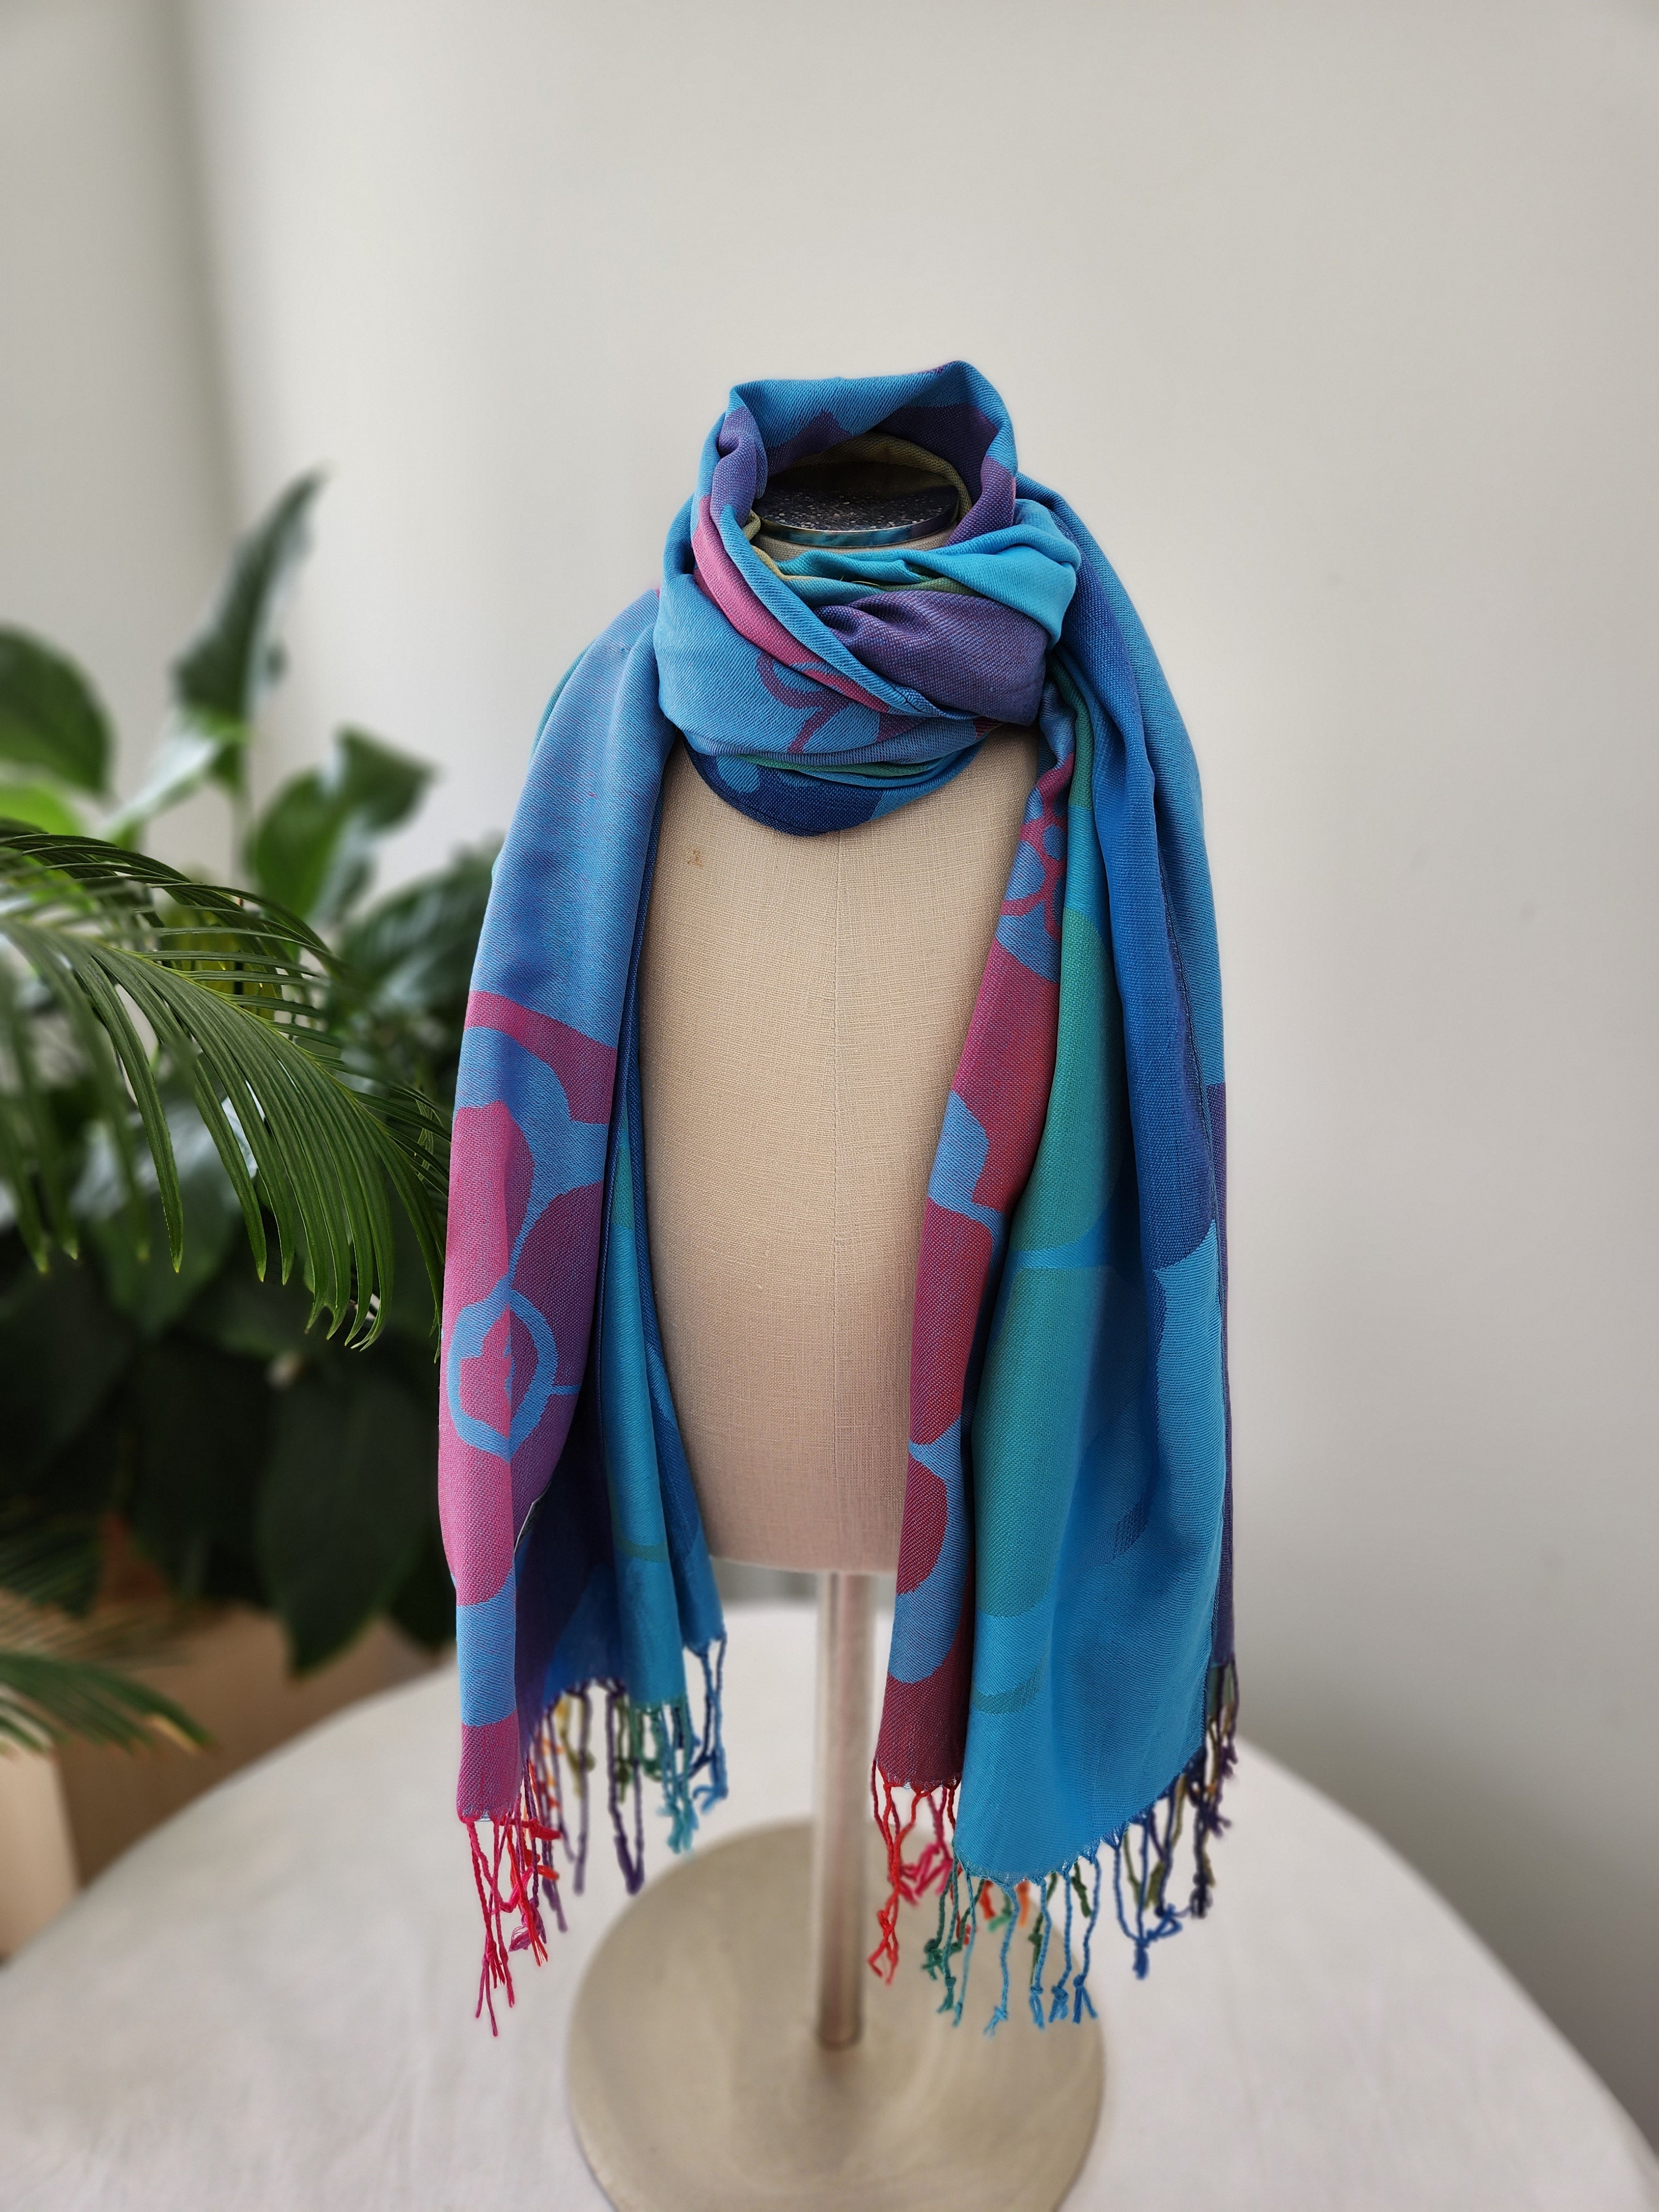 Colorful Women's Scarf in Vibrant, Tropical Colors Makes A Great Holiday Gift